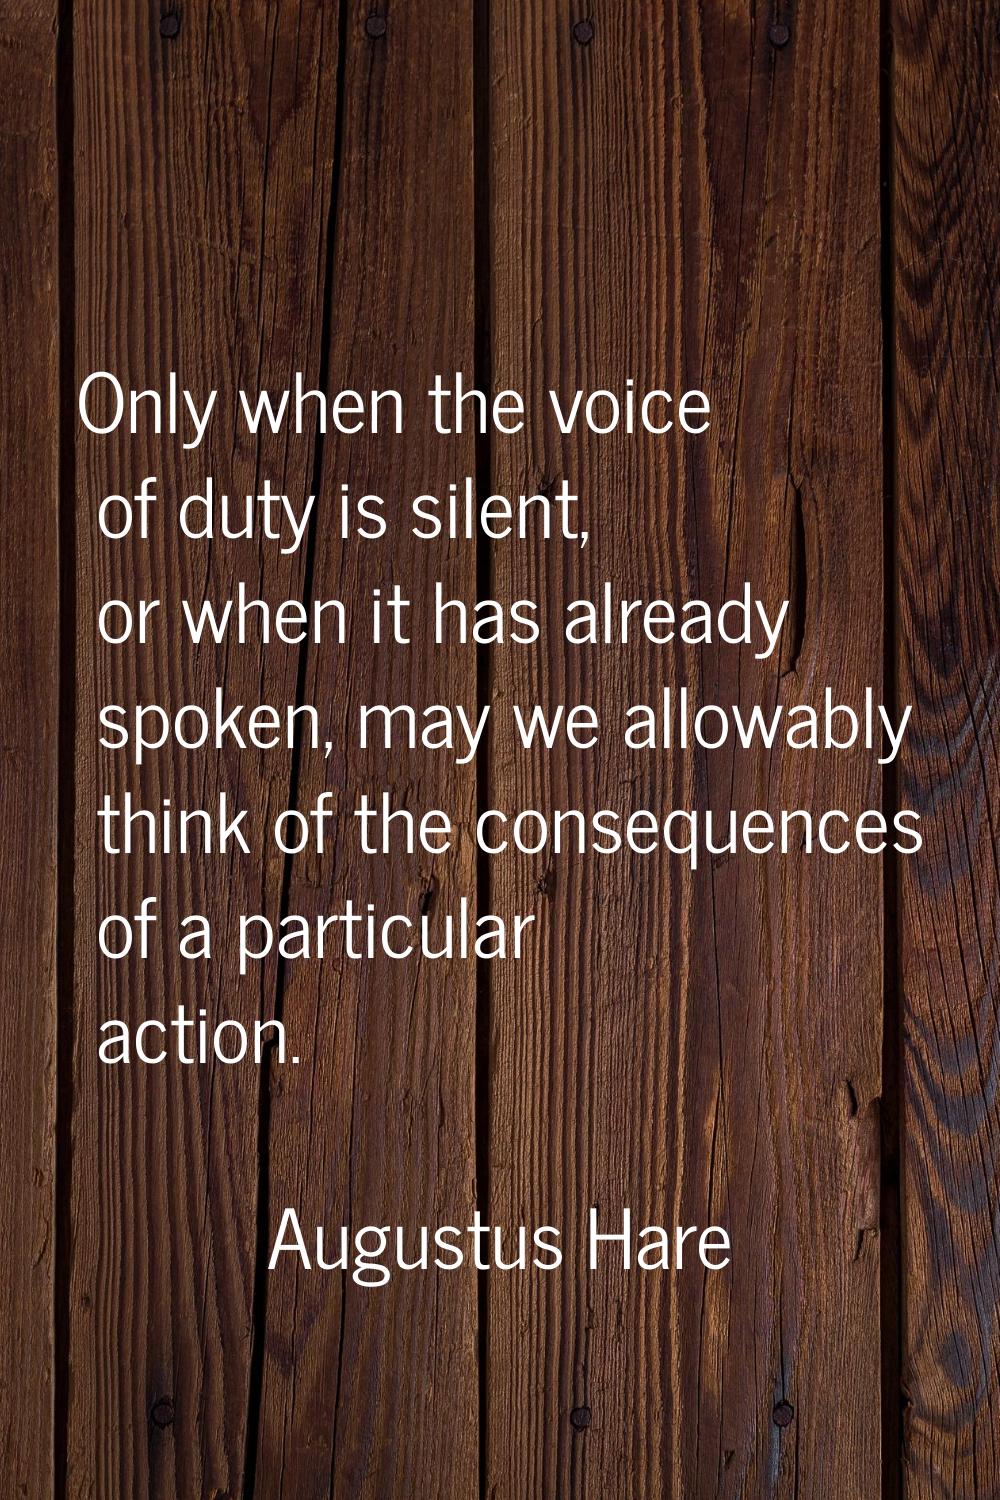 Only when the voice of duty is silent, or when it has already spoken, may we allowably think of the